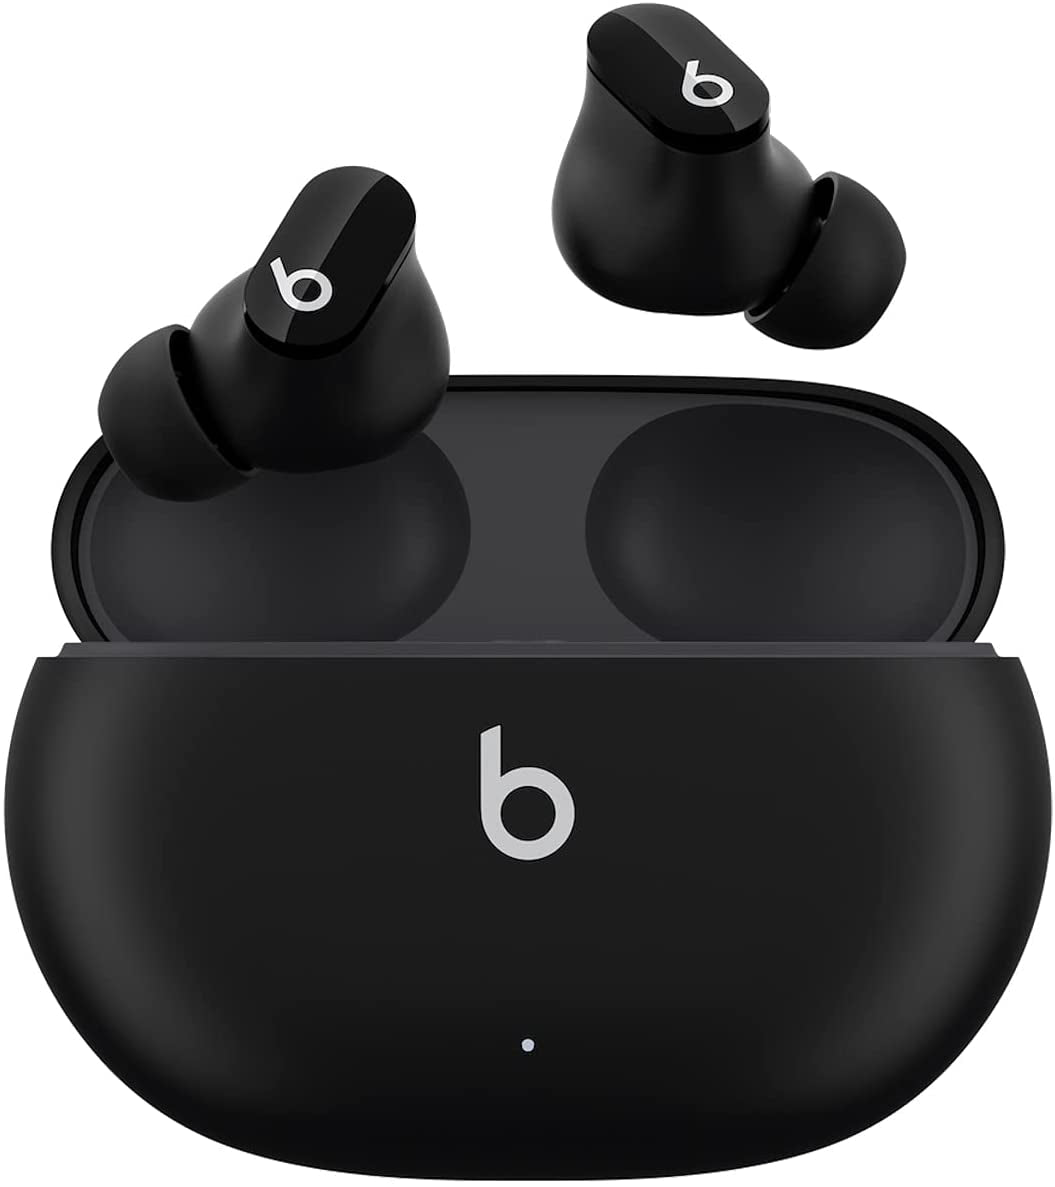 High-Quality Studio Buds: True Wireless Earbuds with Noise Cancelling Technology - Apple & Android Compatible, Integrated Microphone, IPX4 Rated, Resistant to Sweat, Class 1 Bluetooth Headphones - Black